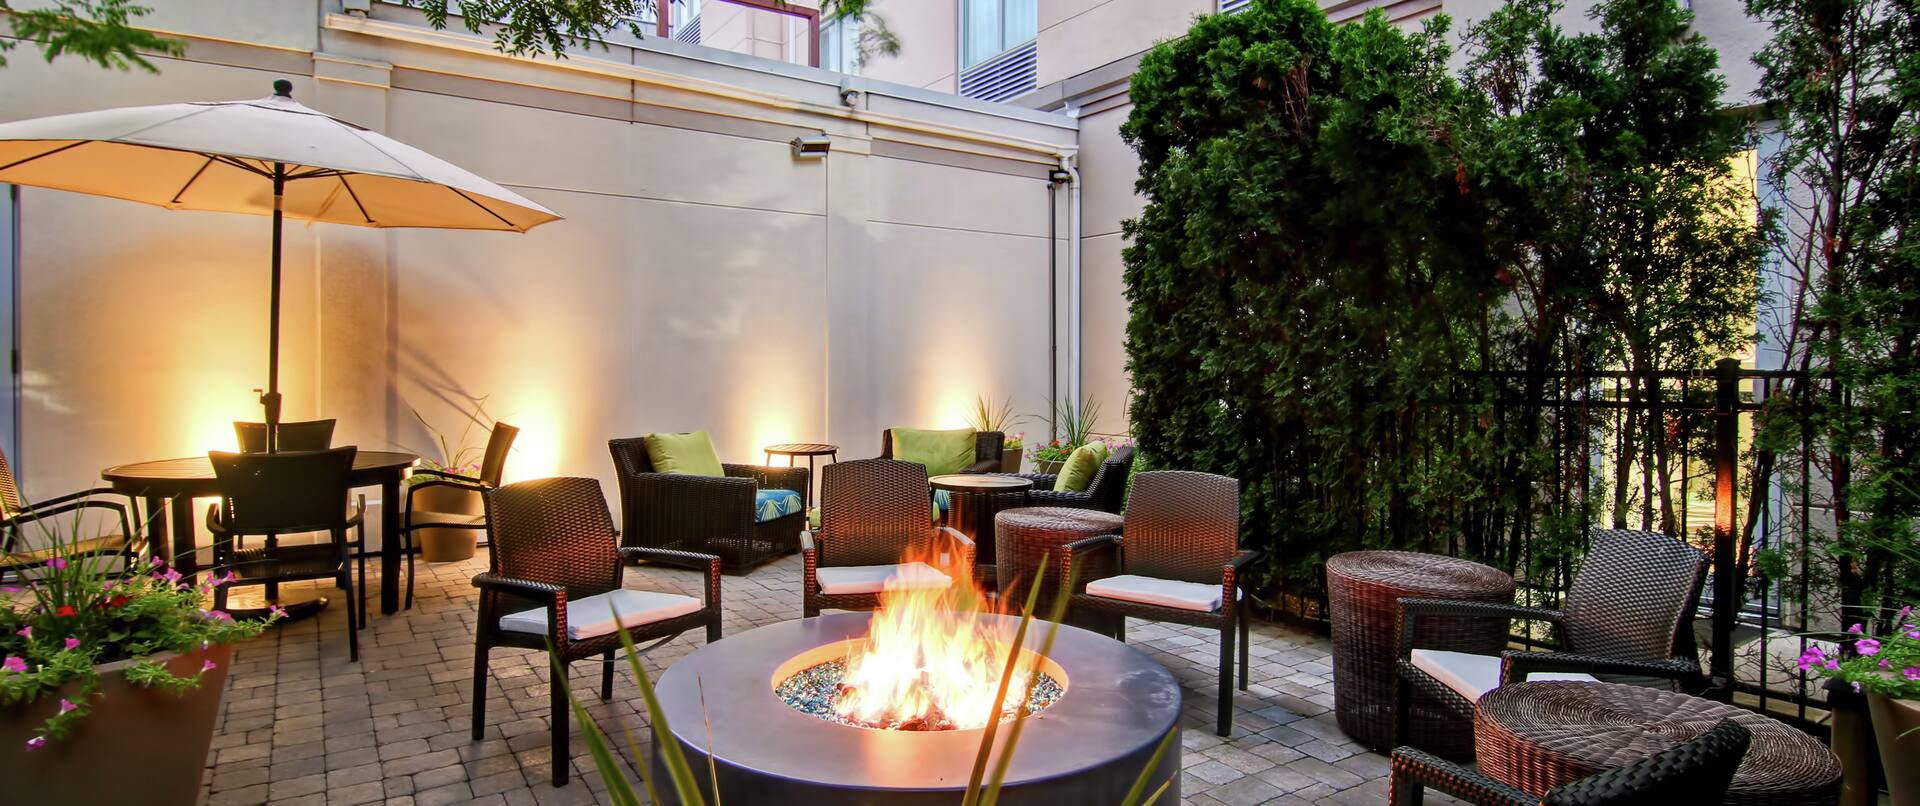 Outdoor Patio and Lounge Area with Fire Pit 